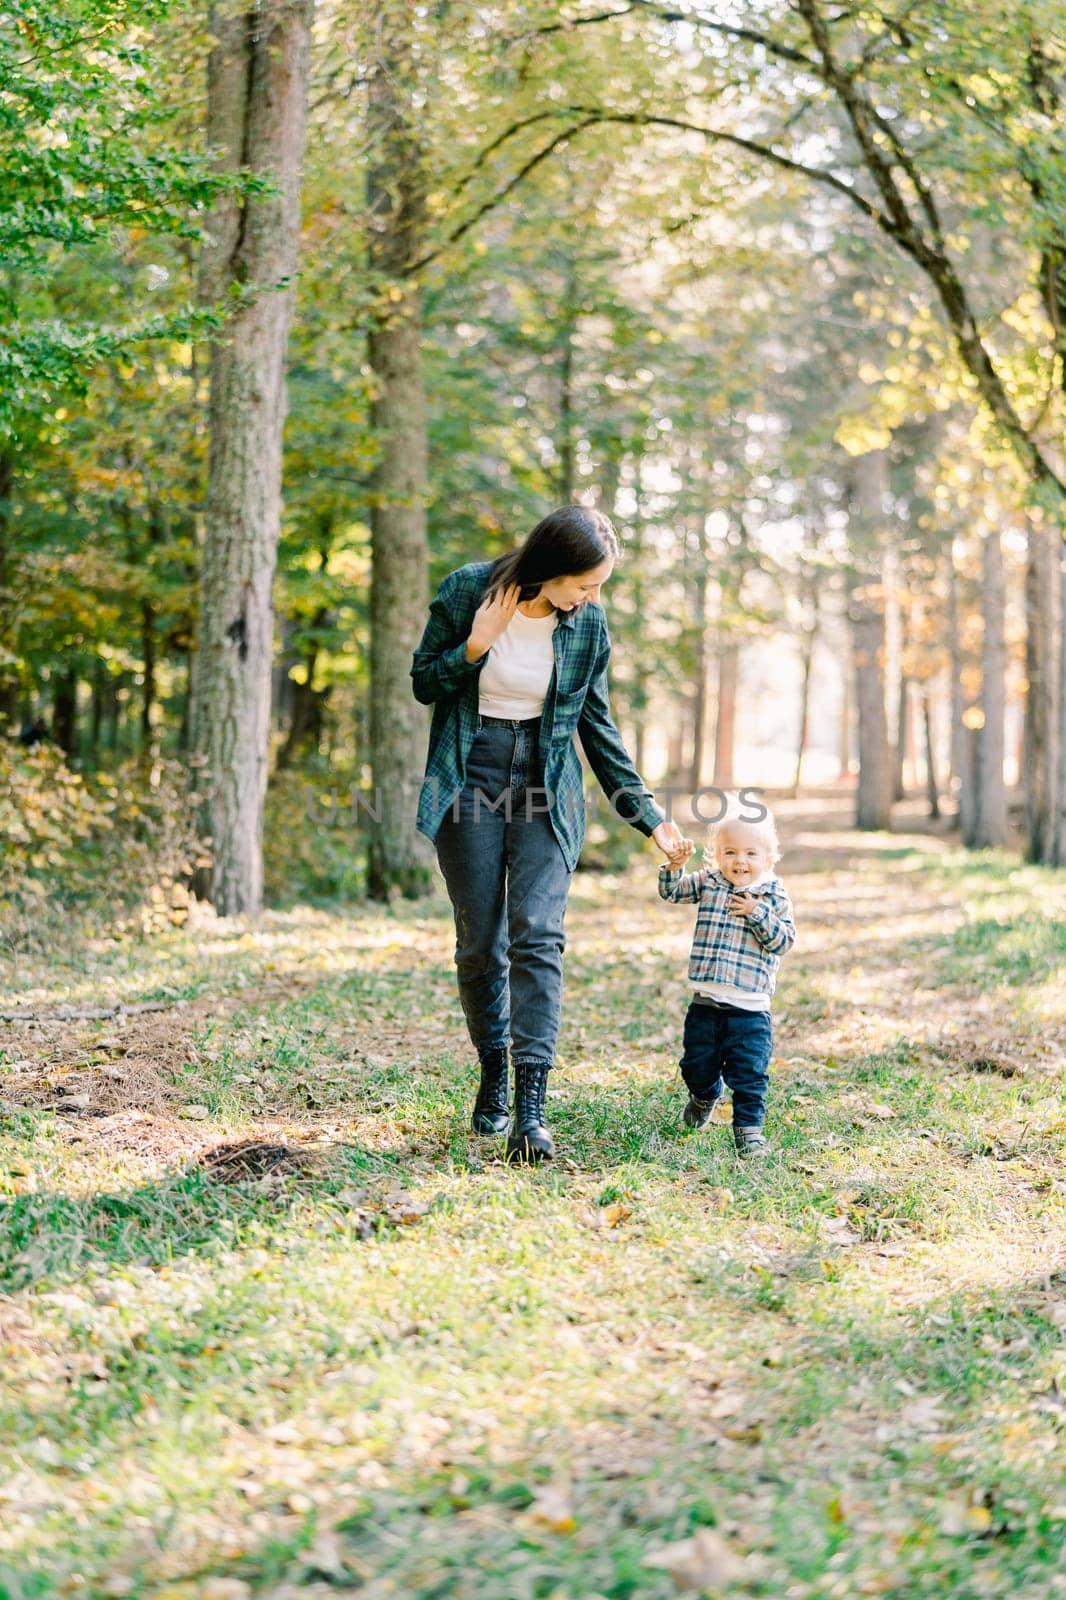 Mom and little girl walk holding hands in the park. High quality photo